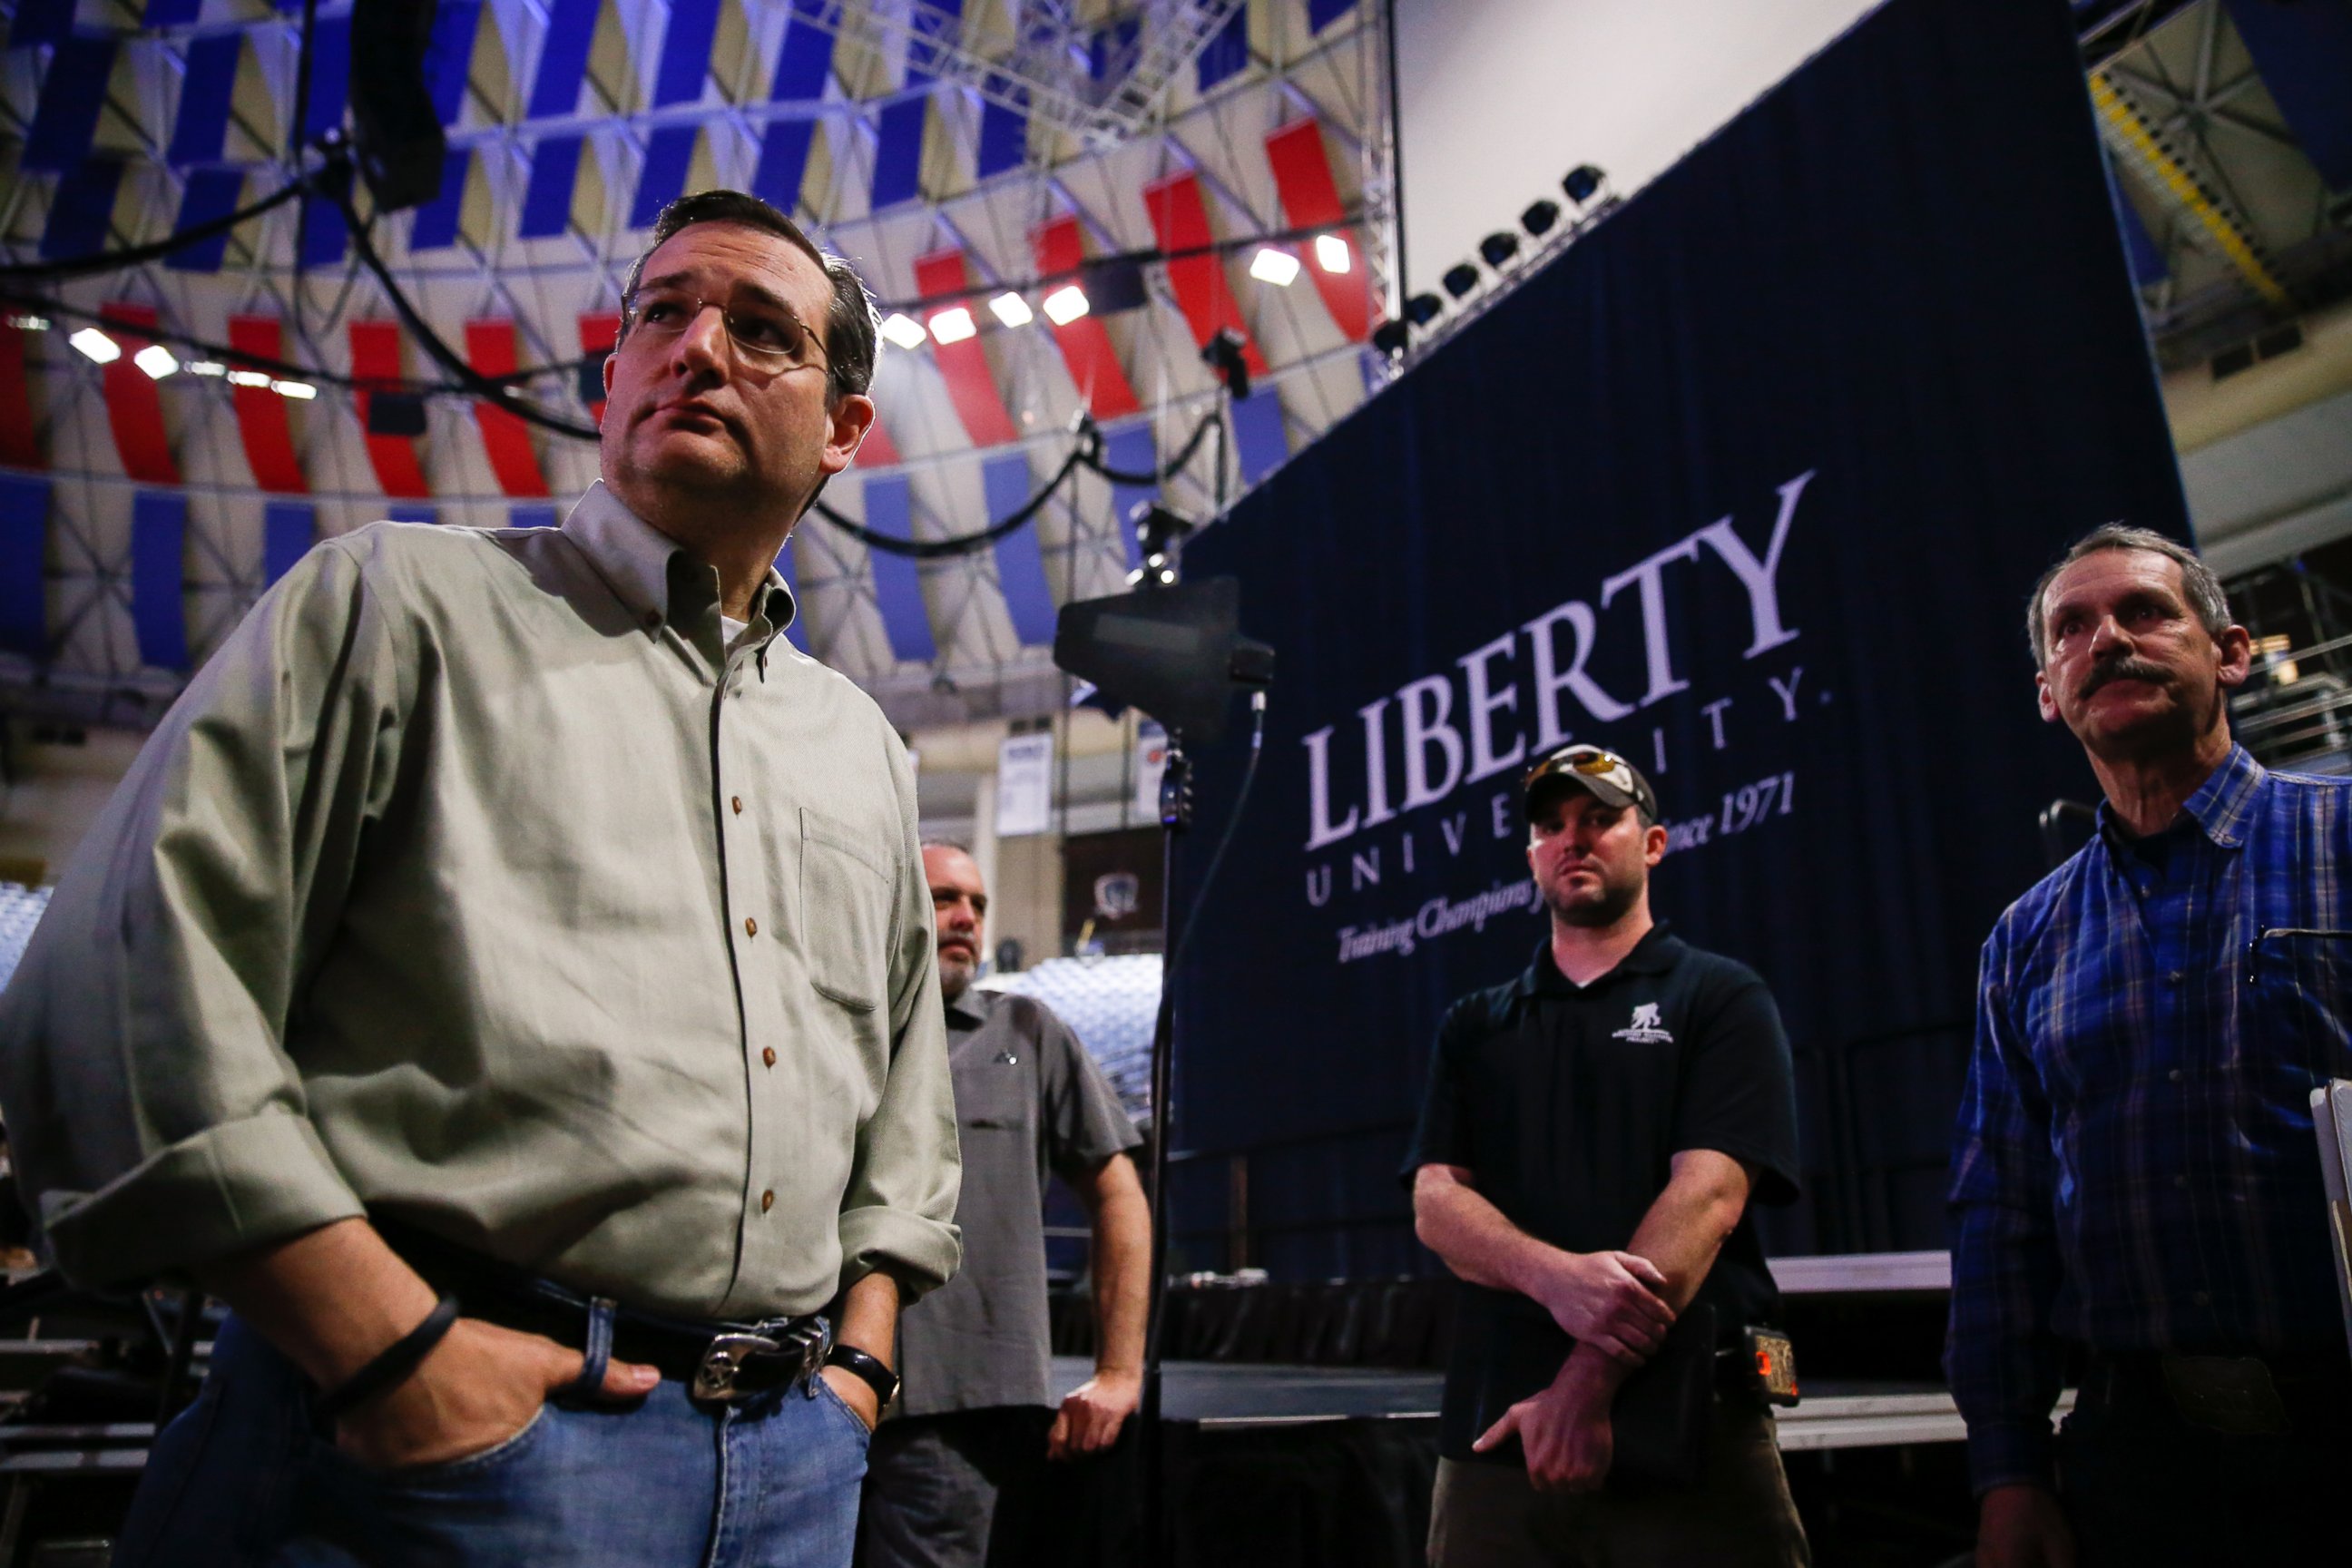 PHOTO: Sen. Ted Cruz, R-Texas, left, meets with staff and coordinators during a walk-through for his Monday morning speech where he will launch his campaign for president of the United States at Liberty University on March 22, 2015 in Lynchburg, Va.